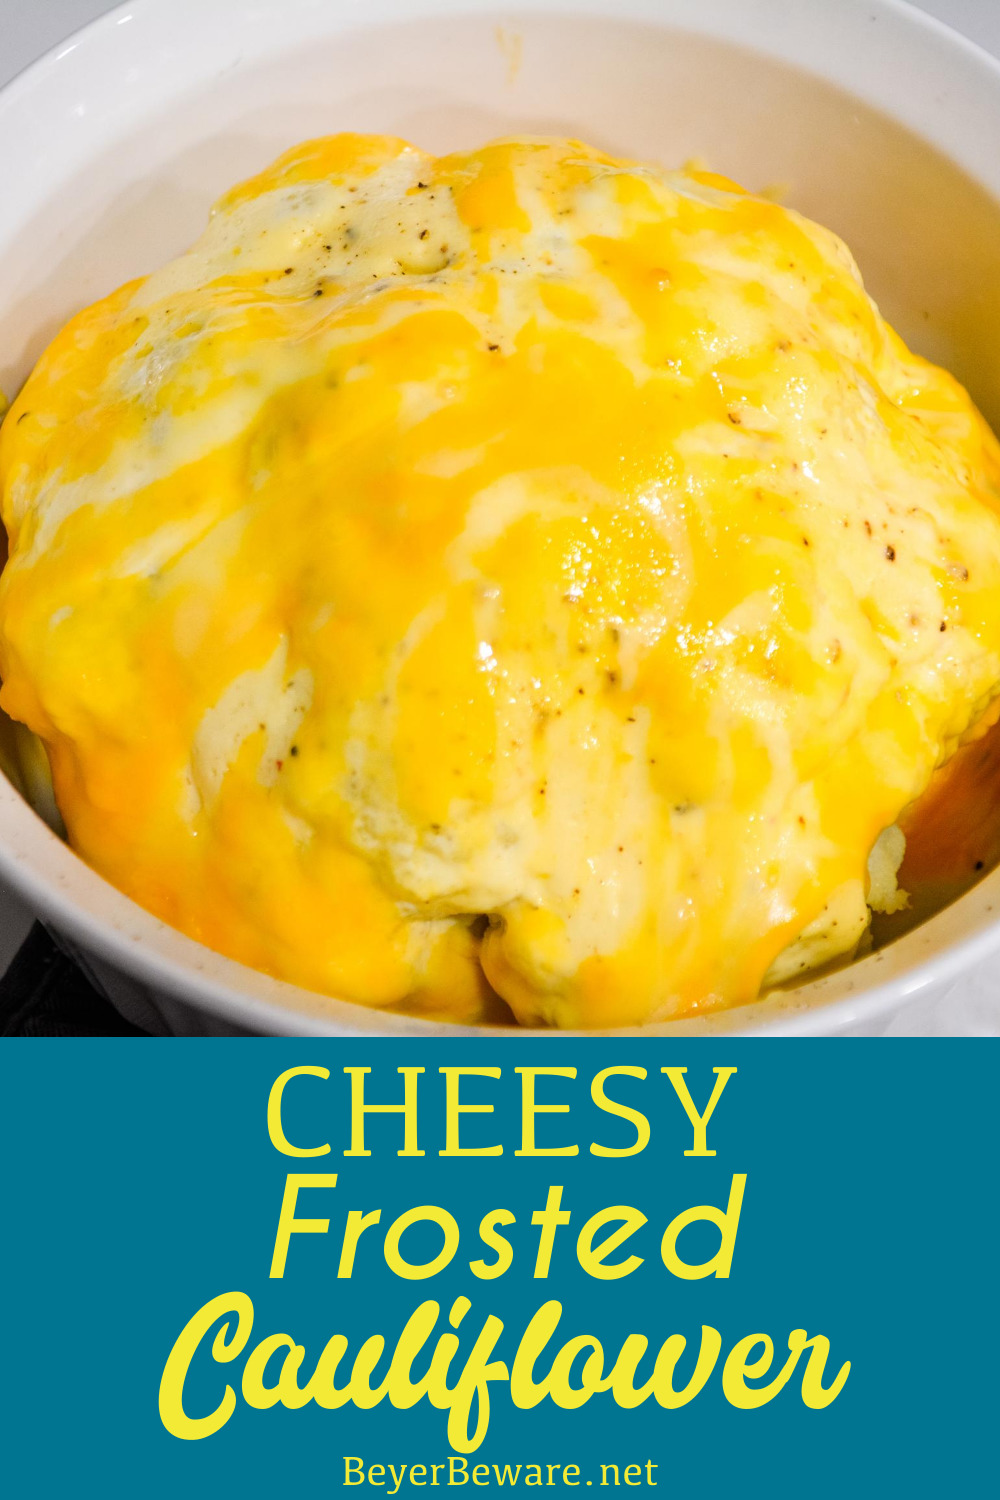 Cheesy Frosted Cauliflower is a whole head of cauliflower, steamed and then frosted with a combination of mayonnaise and mustard and then covered in cheese before quickly roasting in the oven.